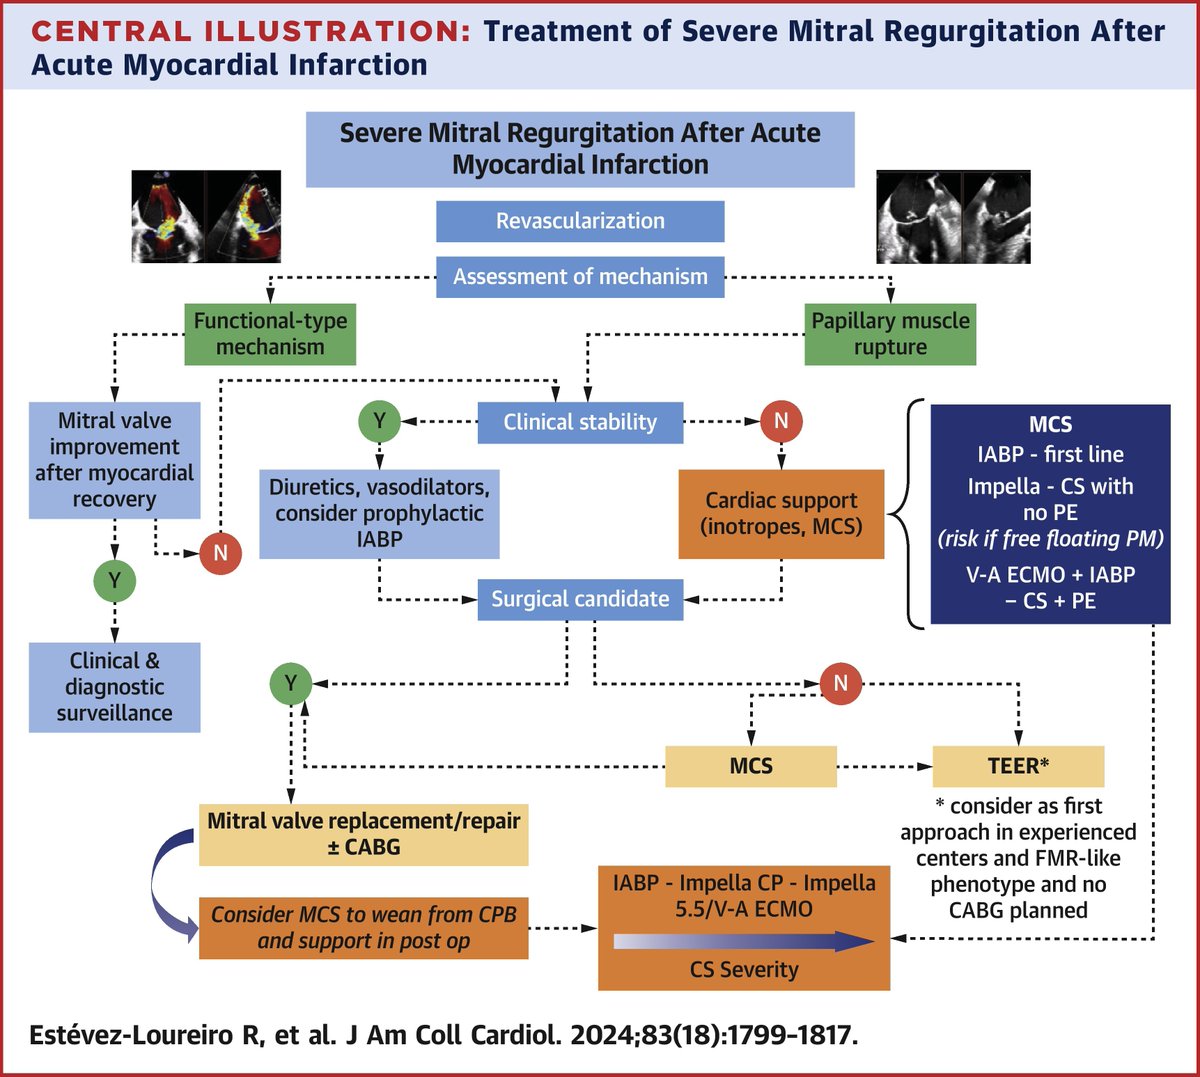 Mortality from severe MR in patients with AMI has not changed much but new techniques in management, including new surgical and transcatheter approaches, shed some positive light on the future of this deadly condition bit.ly/44nmvVt #JACC #vhdMR #cvAMI @RodrigoEstvez1